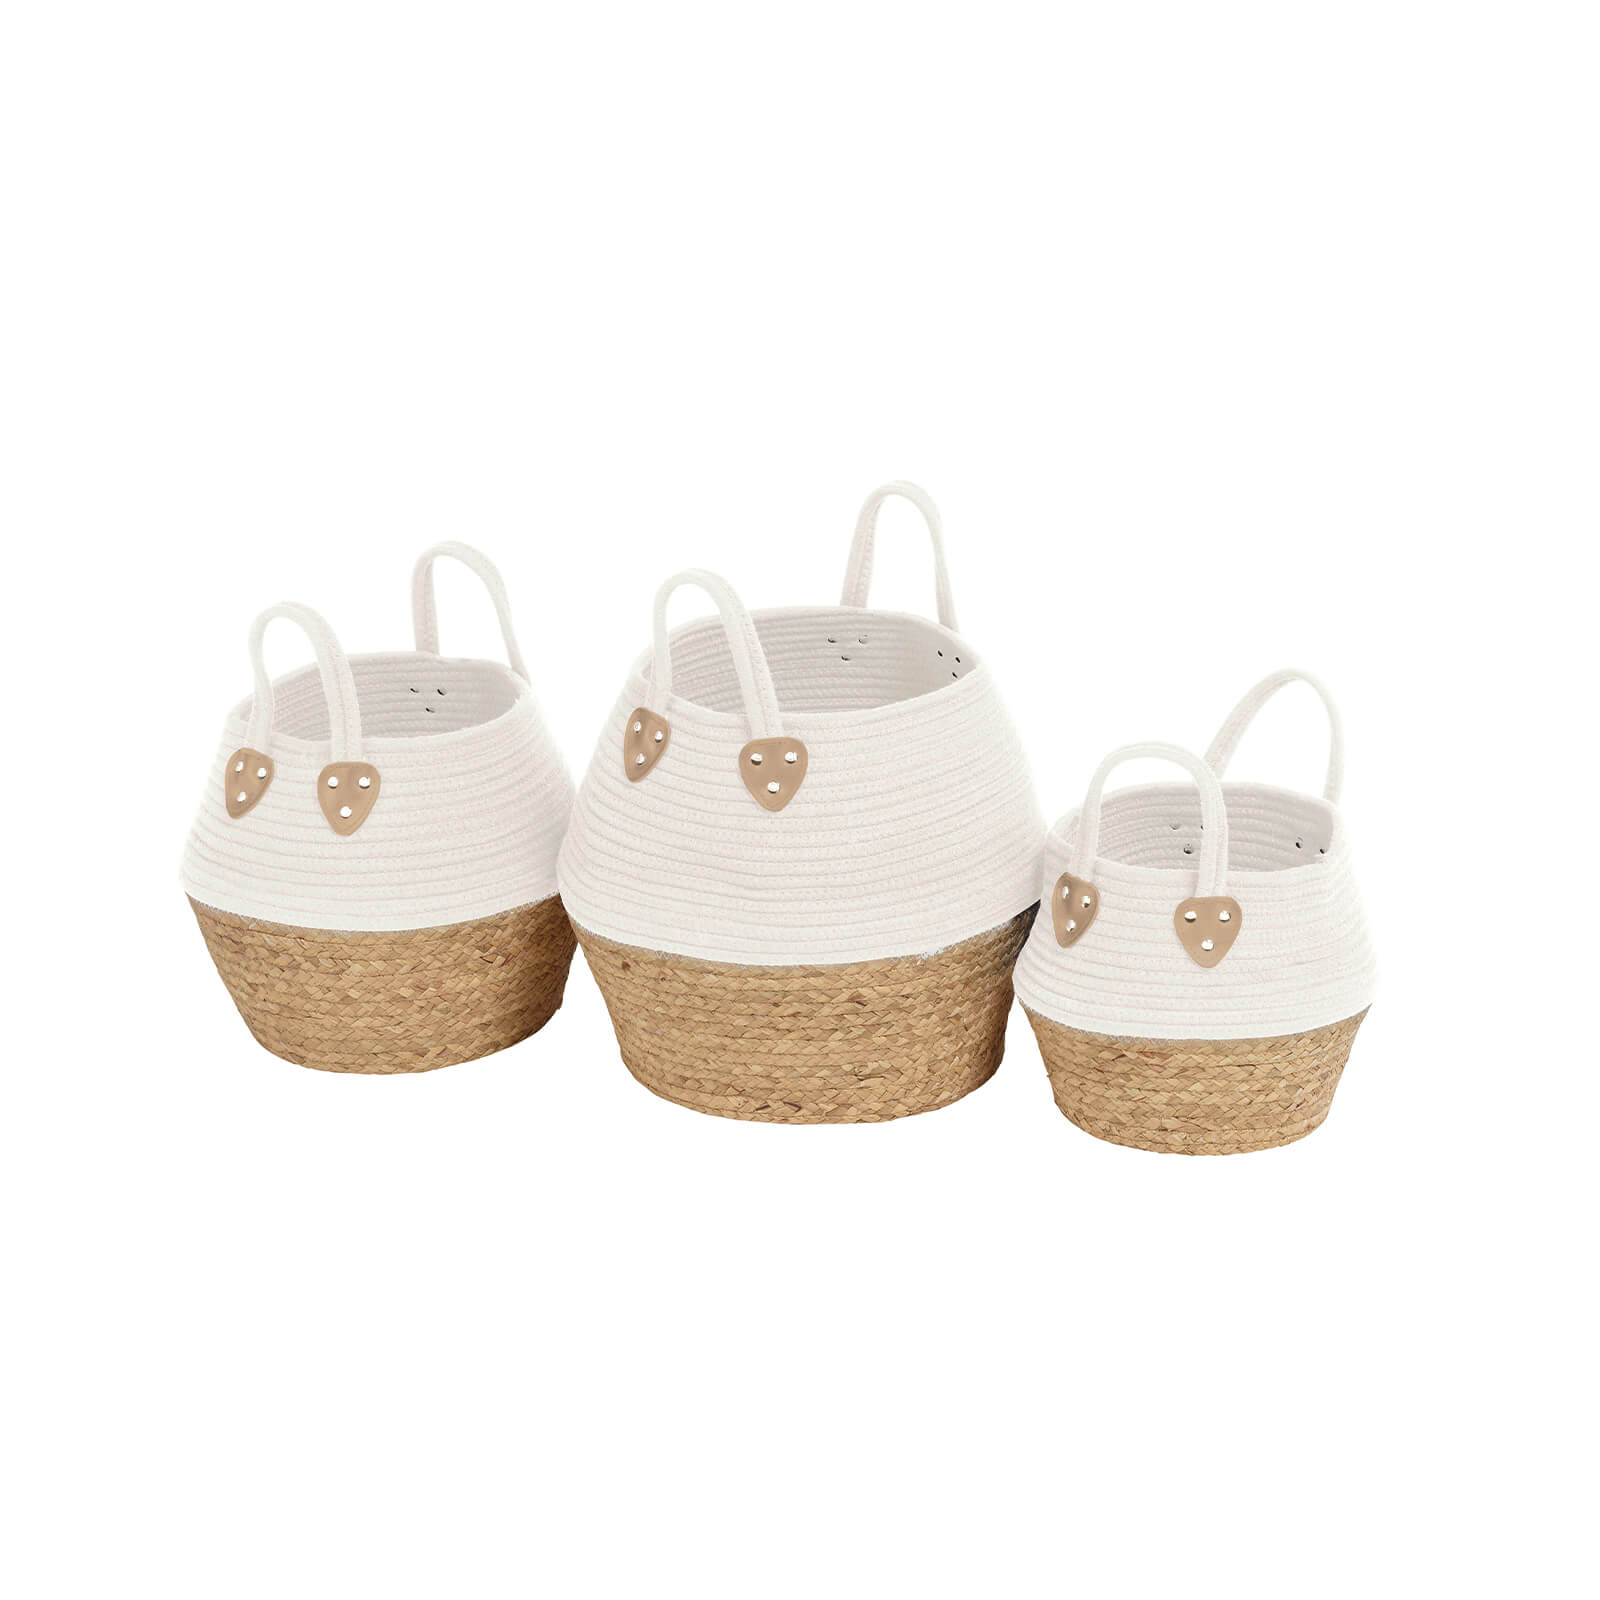 White Rope Baskets - Set of 3